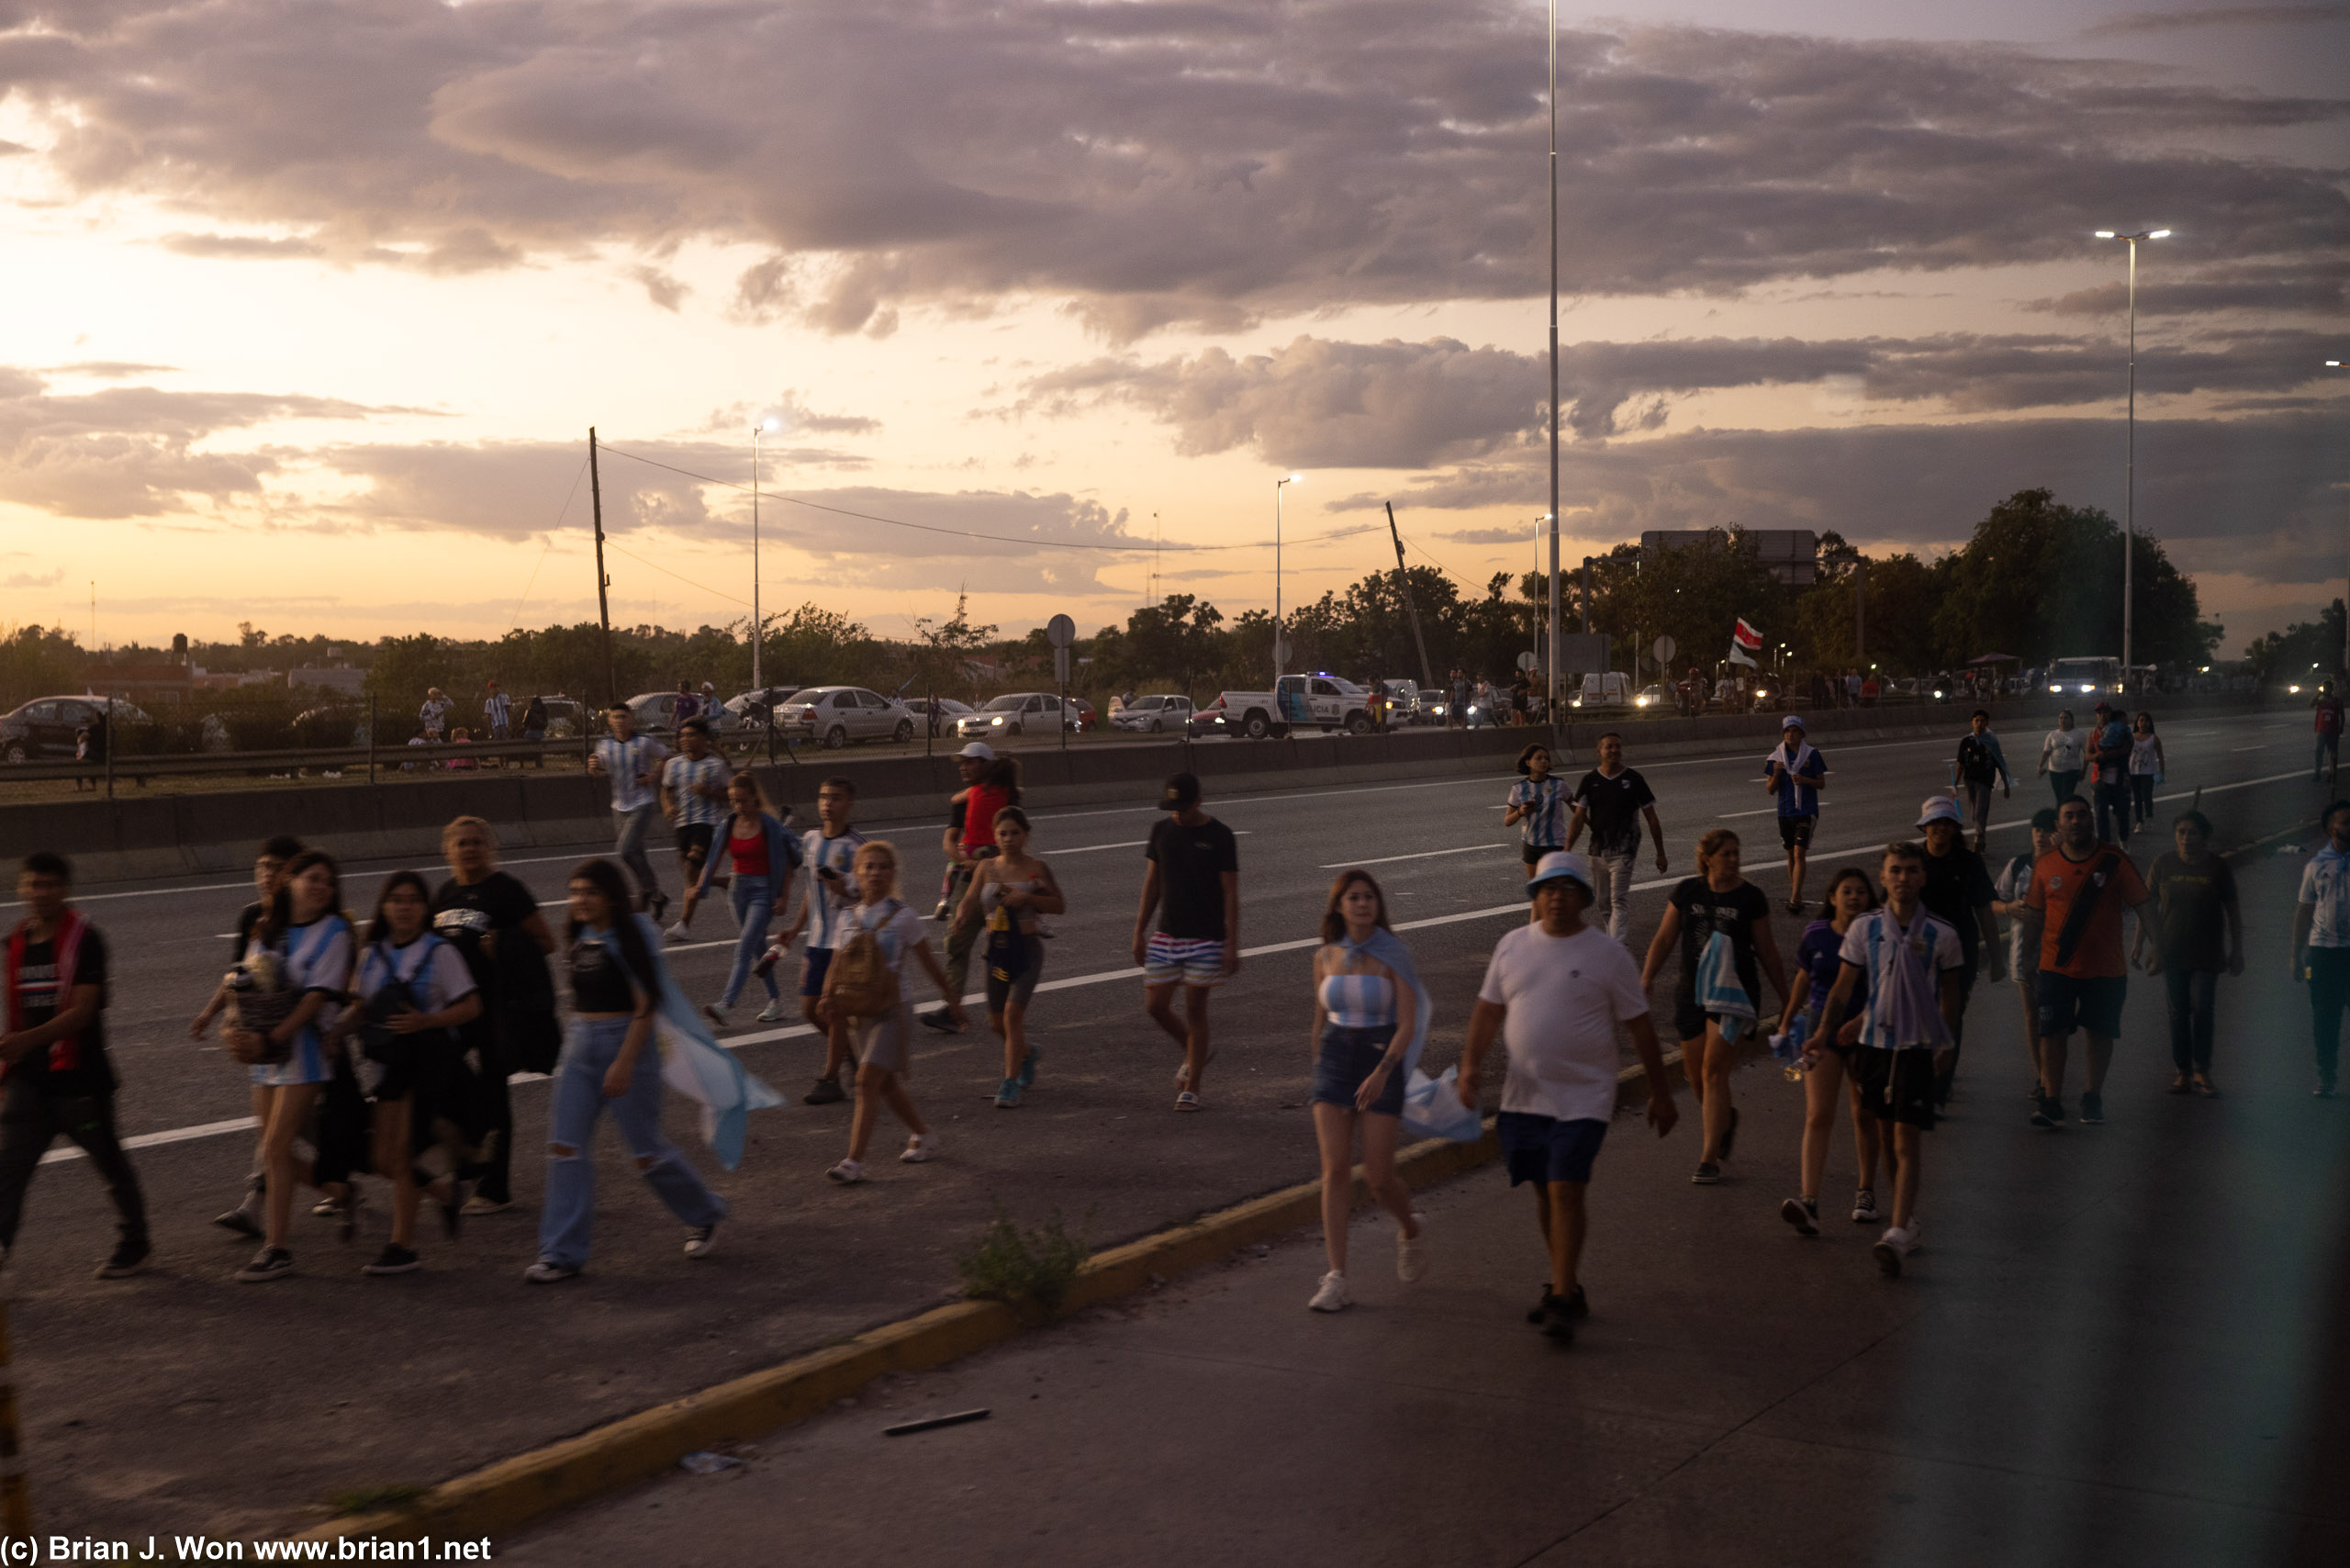 A bit deeper into sunrise, started seeing fans walking back from the airport.